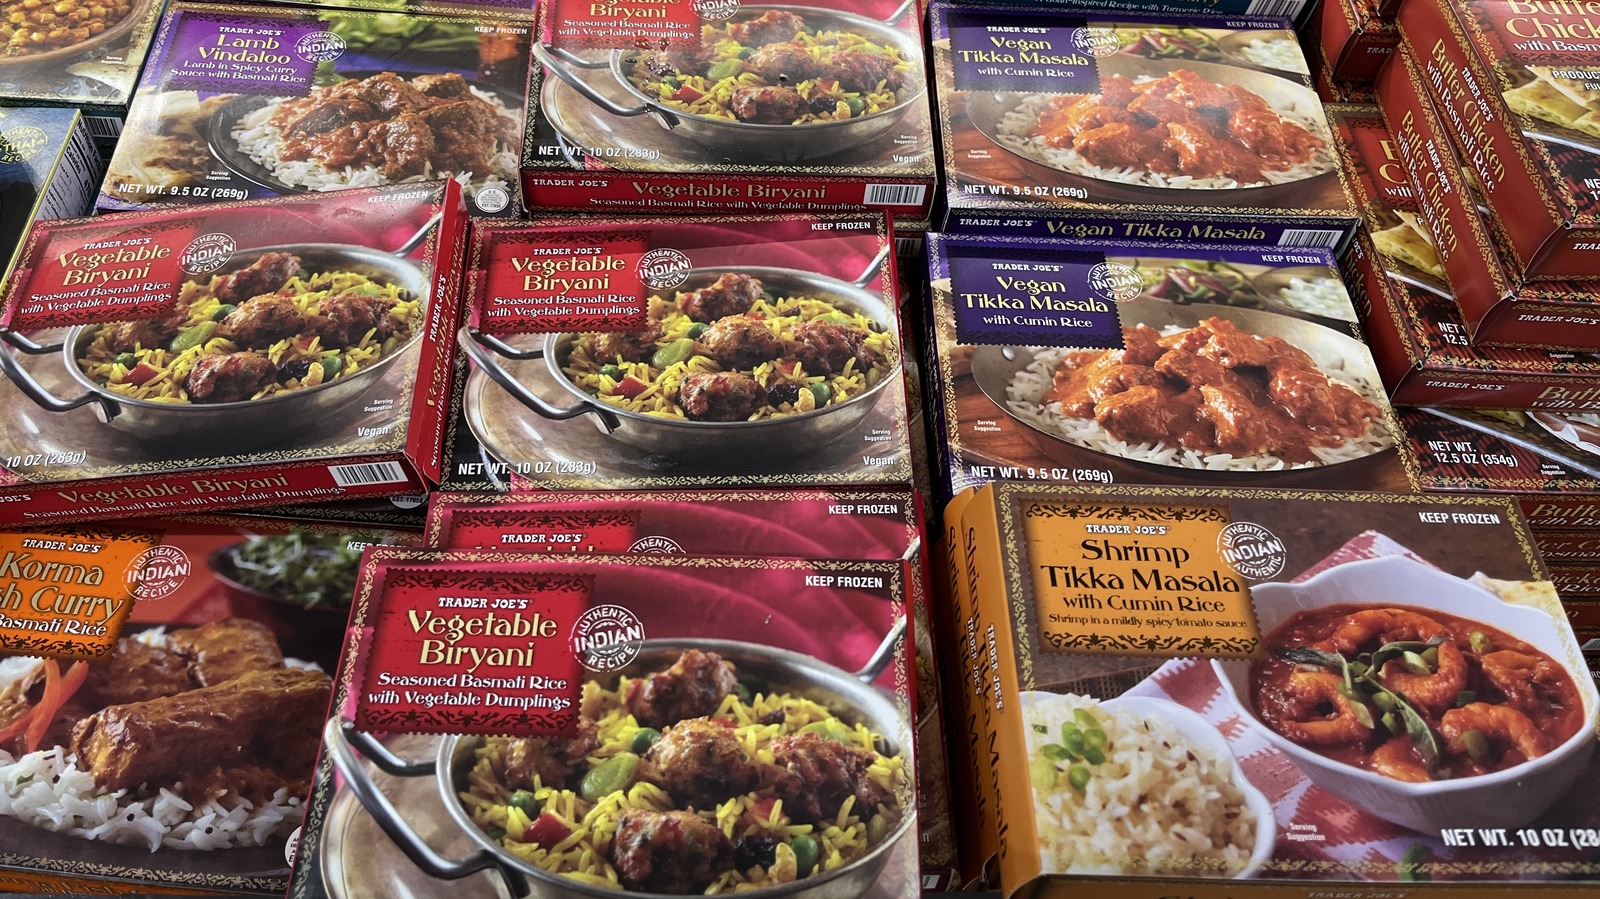 https://www.mashed.com/img/gallery/every-trader-joes-frozen-indian-food-ranked-from-worst-to-best/l-intro-1645569577.jpg